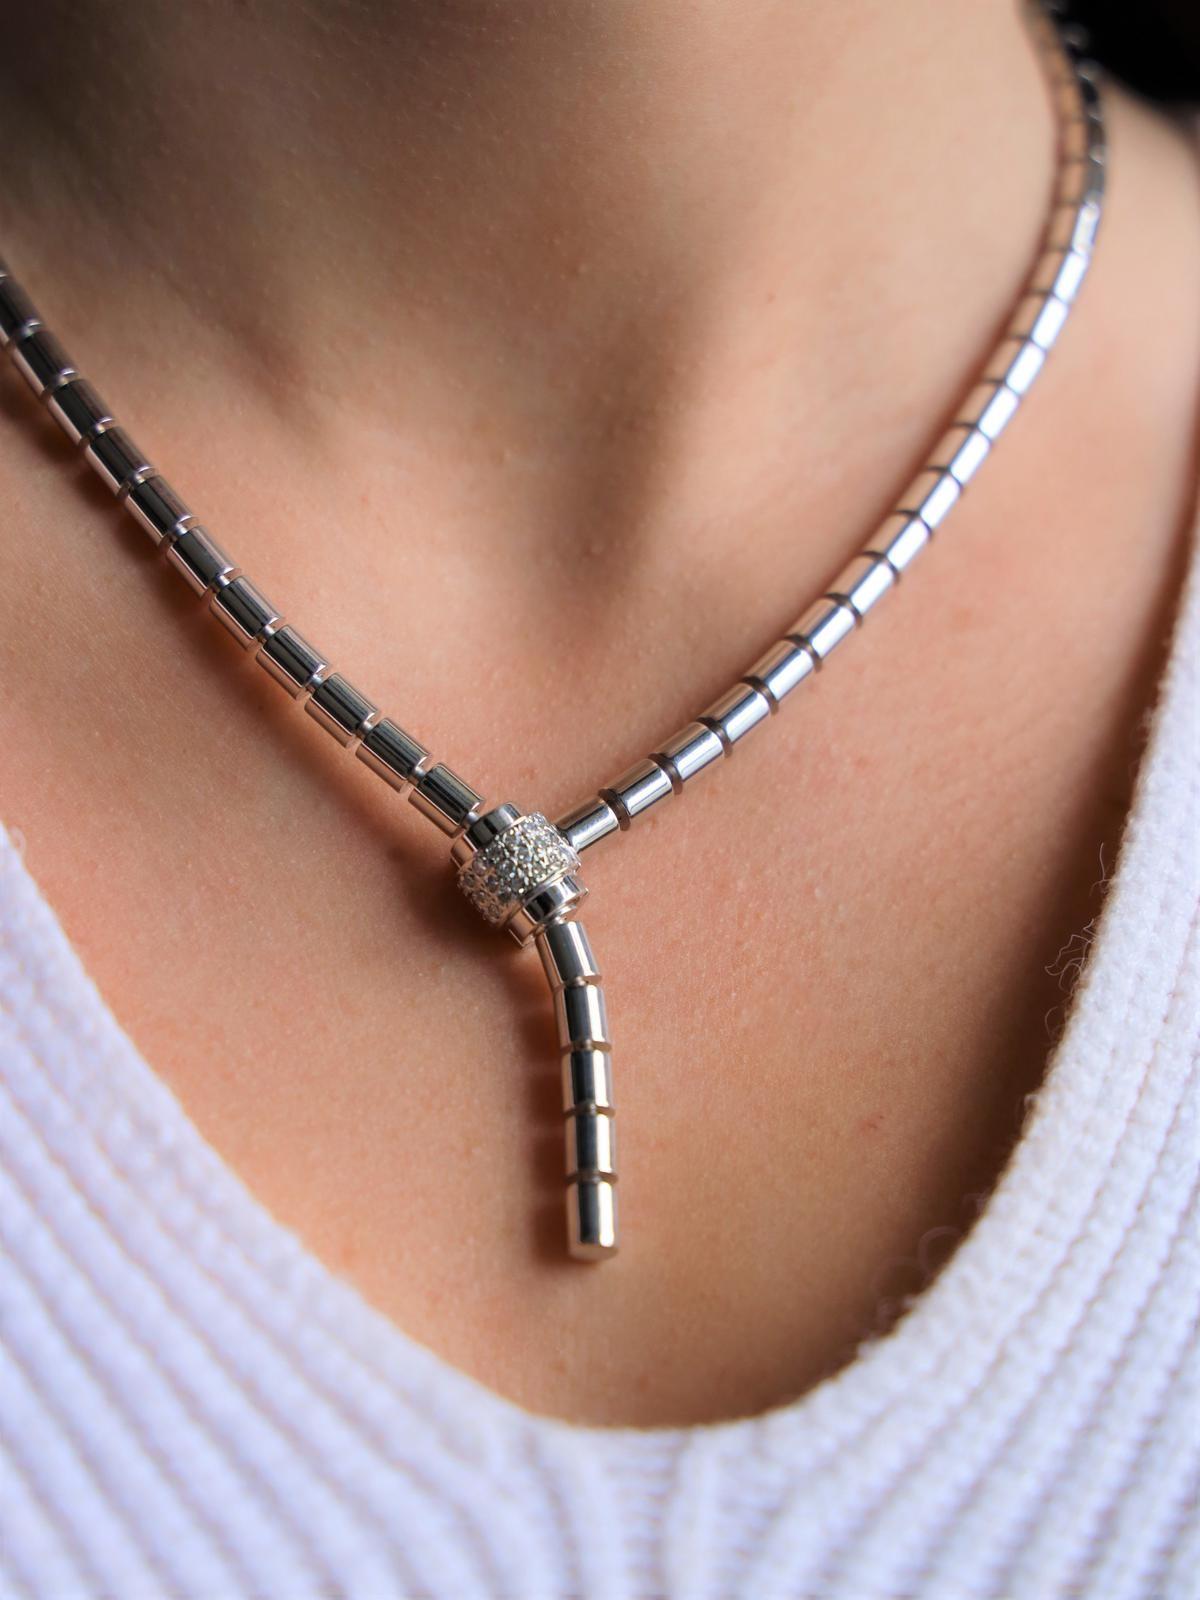 Necklace in white gold 750 thousandths (18 carats). tubular motif serving as a clasp set with brilliant-cut diamonds. flexible mesh. total diamond weight: 0.24 ct. (24 diamonds of 0.01 ct approximately). length: 50 cm. dimensions motif/clasp: 1.12 x